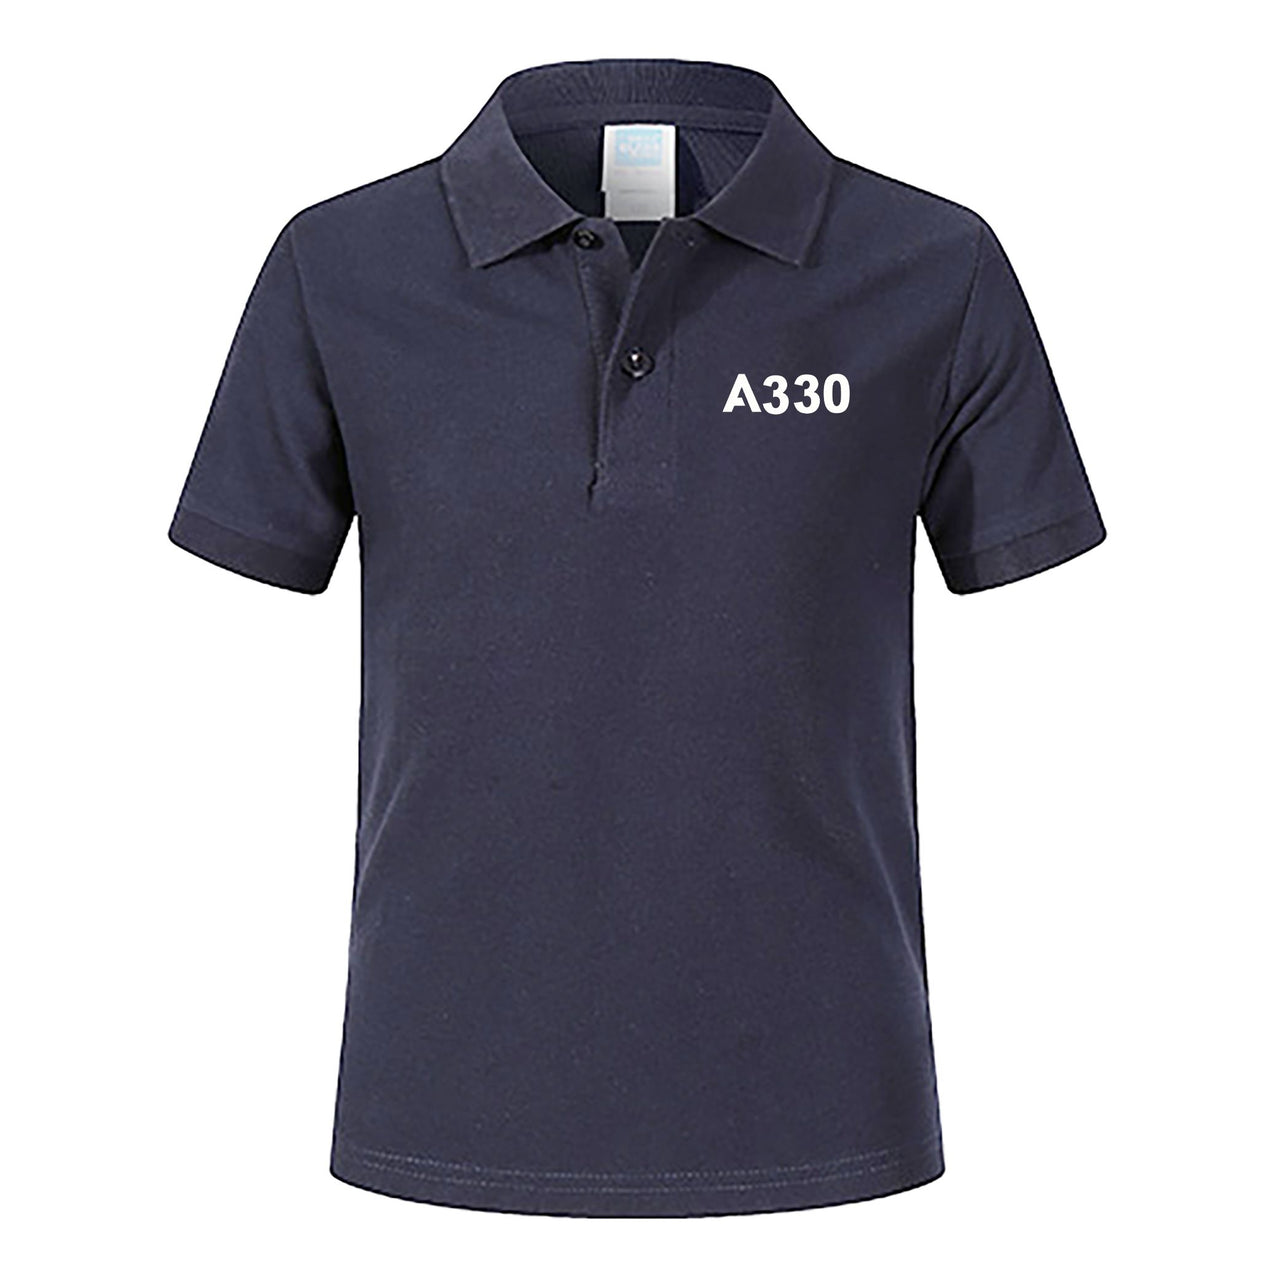 A330 Flat Text Designed Children Polo T-Shirts